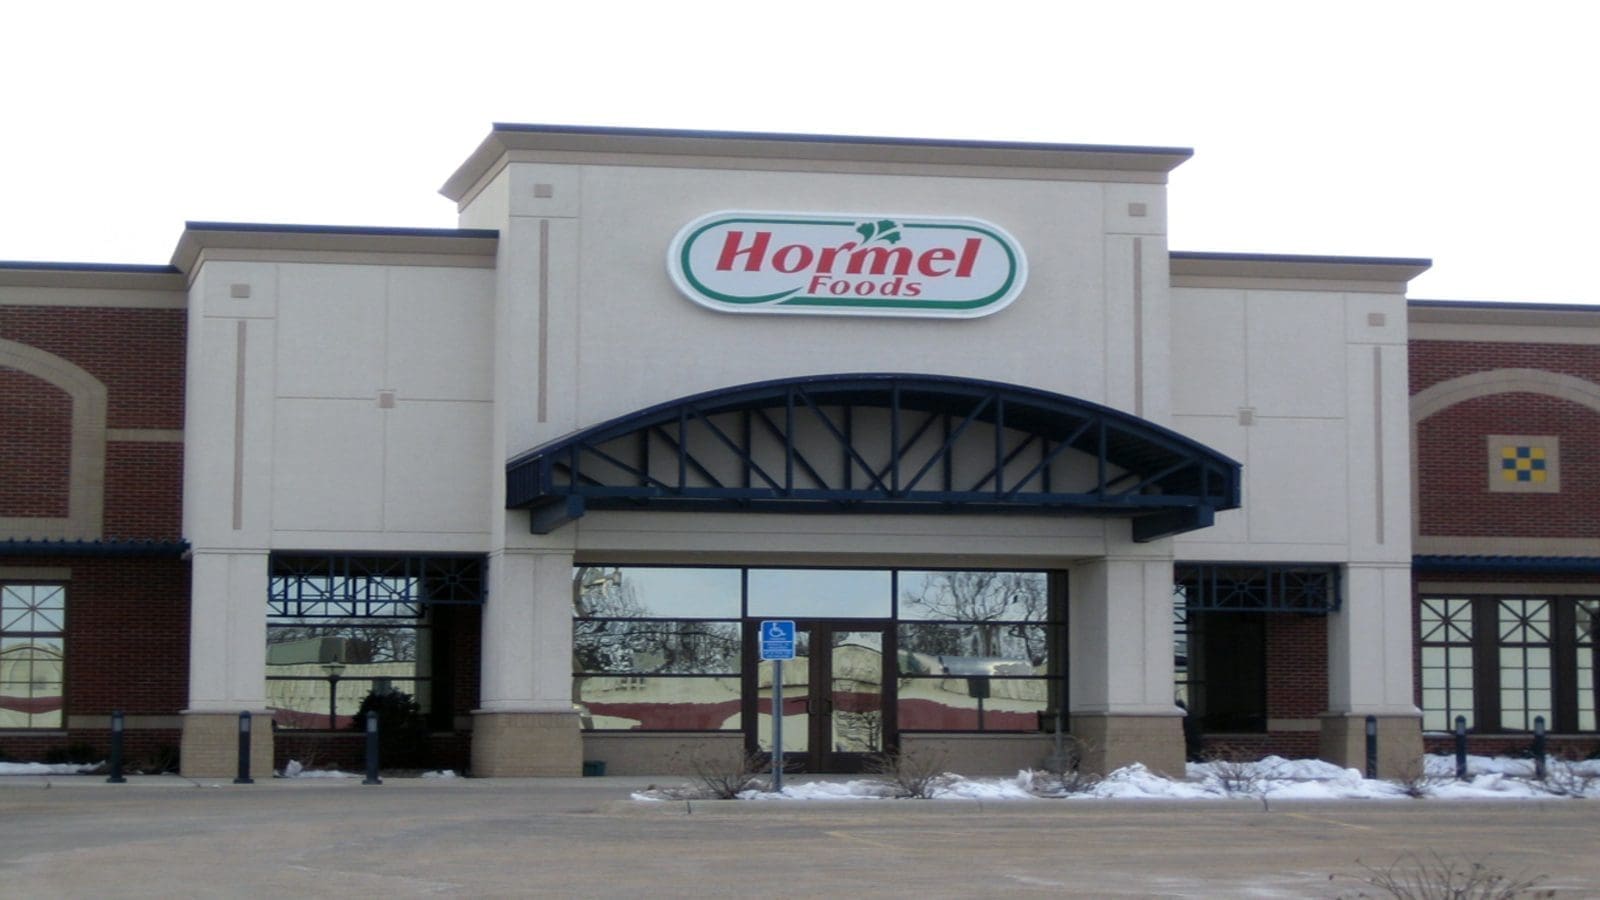 Hormel Foods introduces new strategic business model, transitions to three operating segments